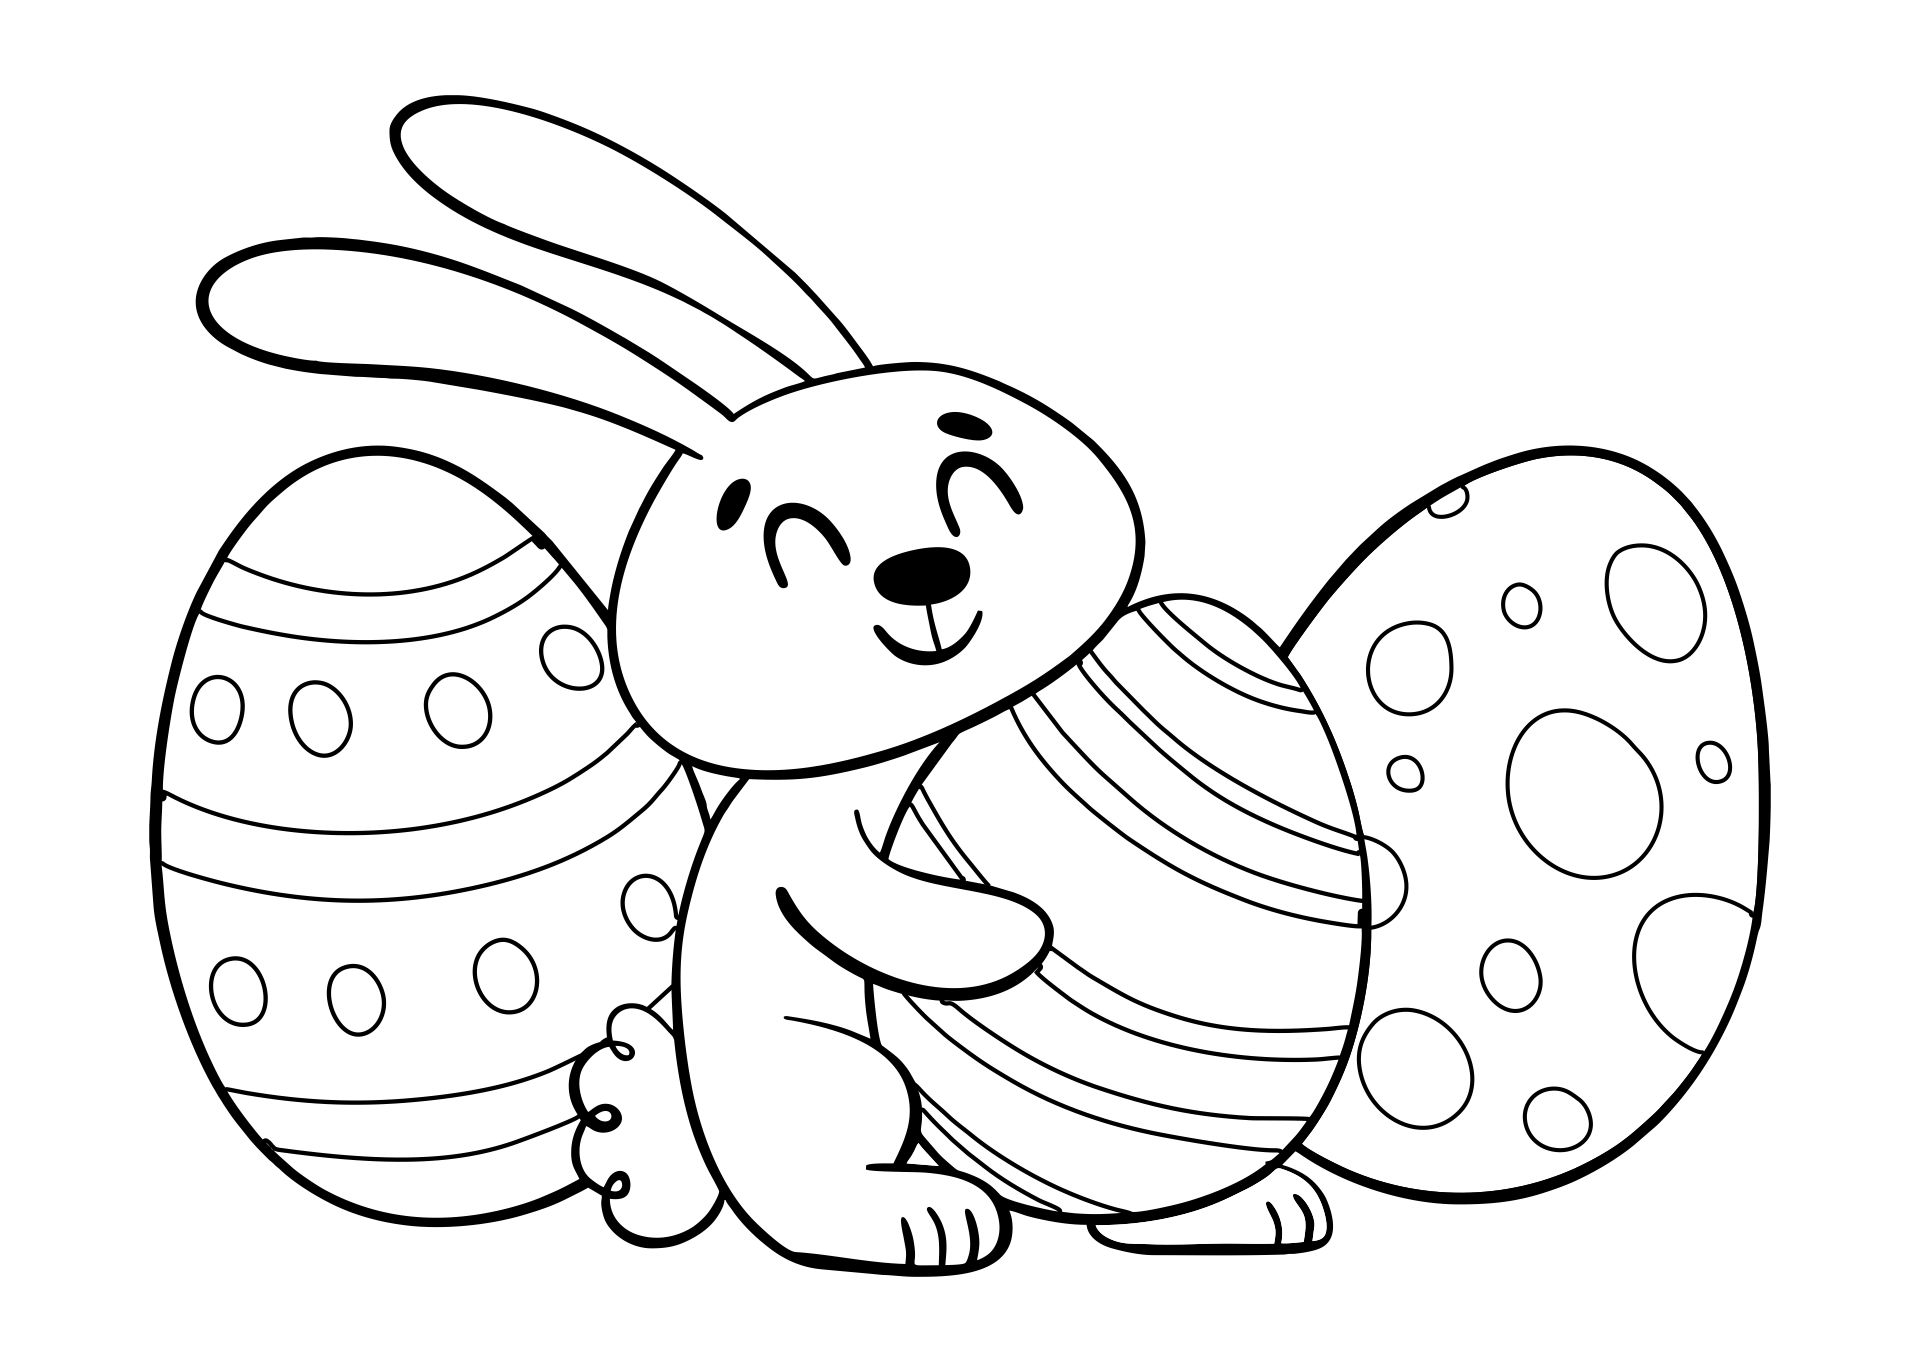 Printable Easter Bunny Coloring Pages for Preschoolers